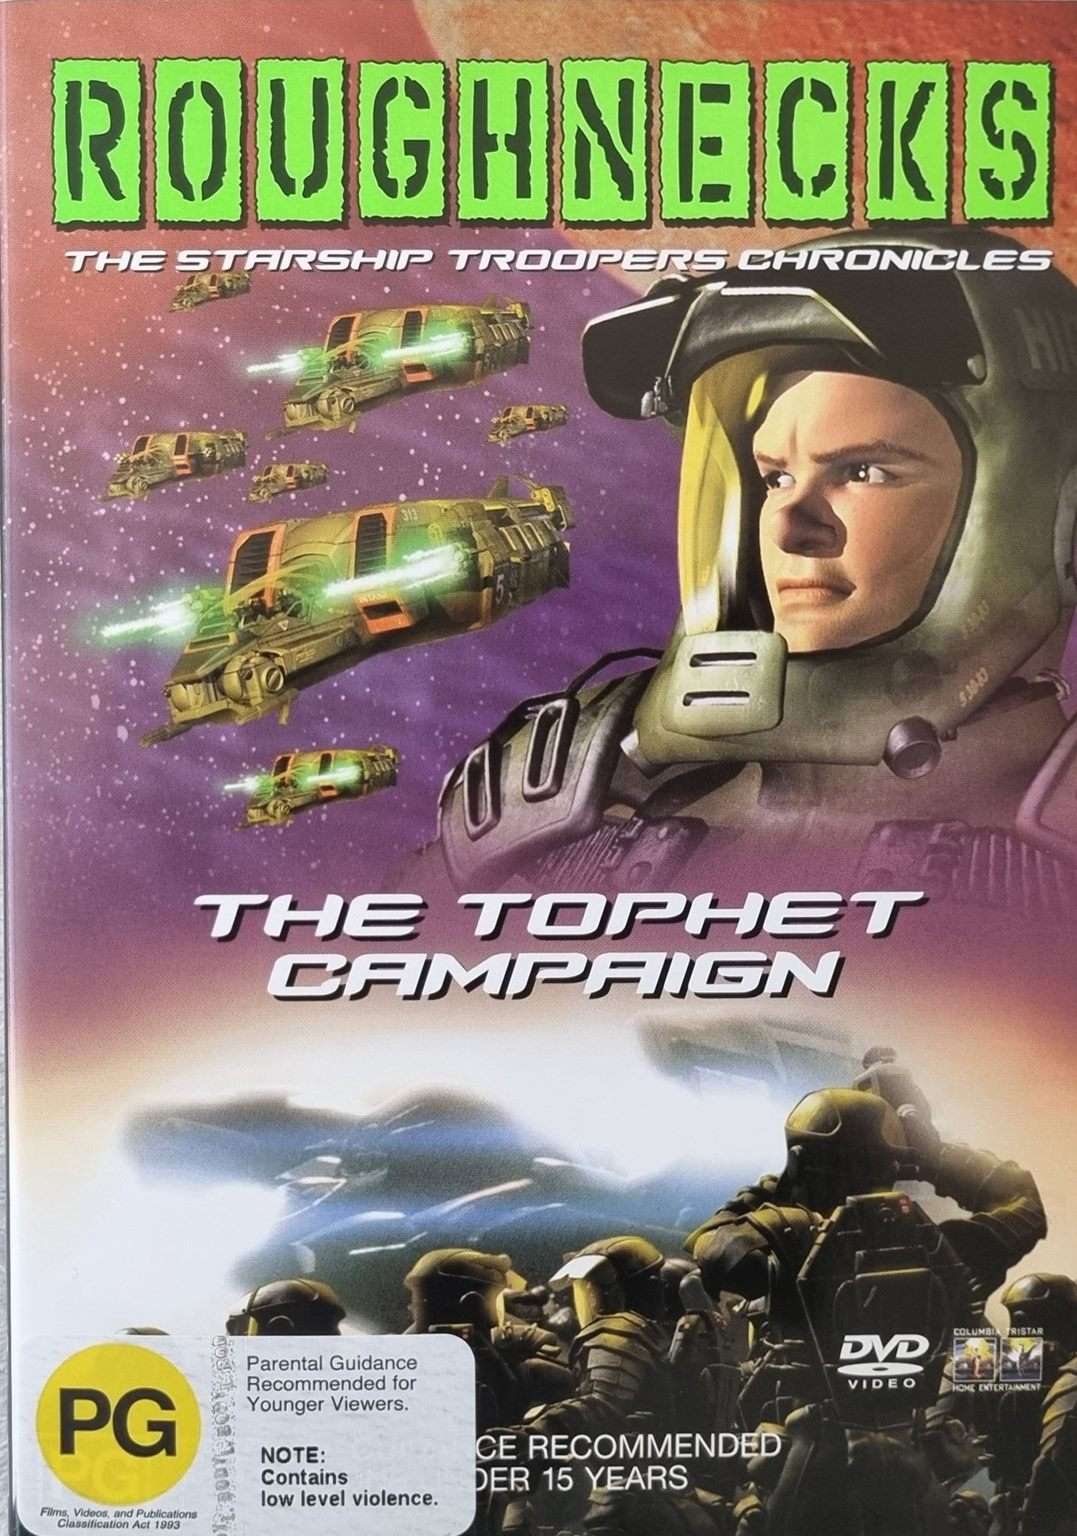 Roughnecks: The Starship Troopers Chronicles The Tophet Campaign